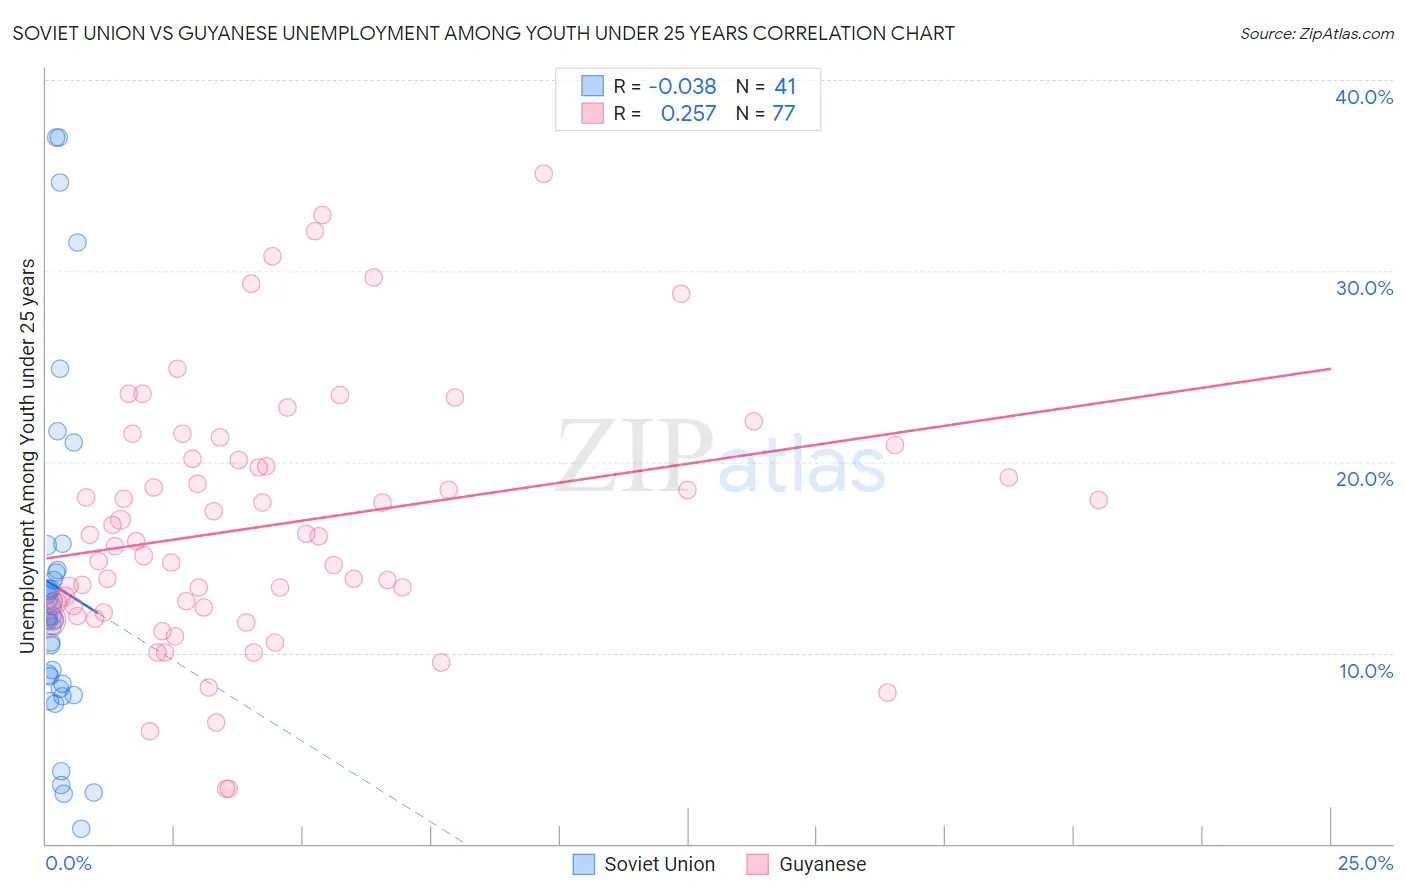 Soviet Union vs Guyanese Unemployment Among Youth under 25 years